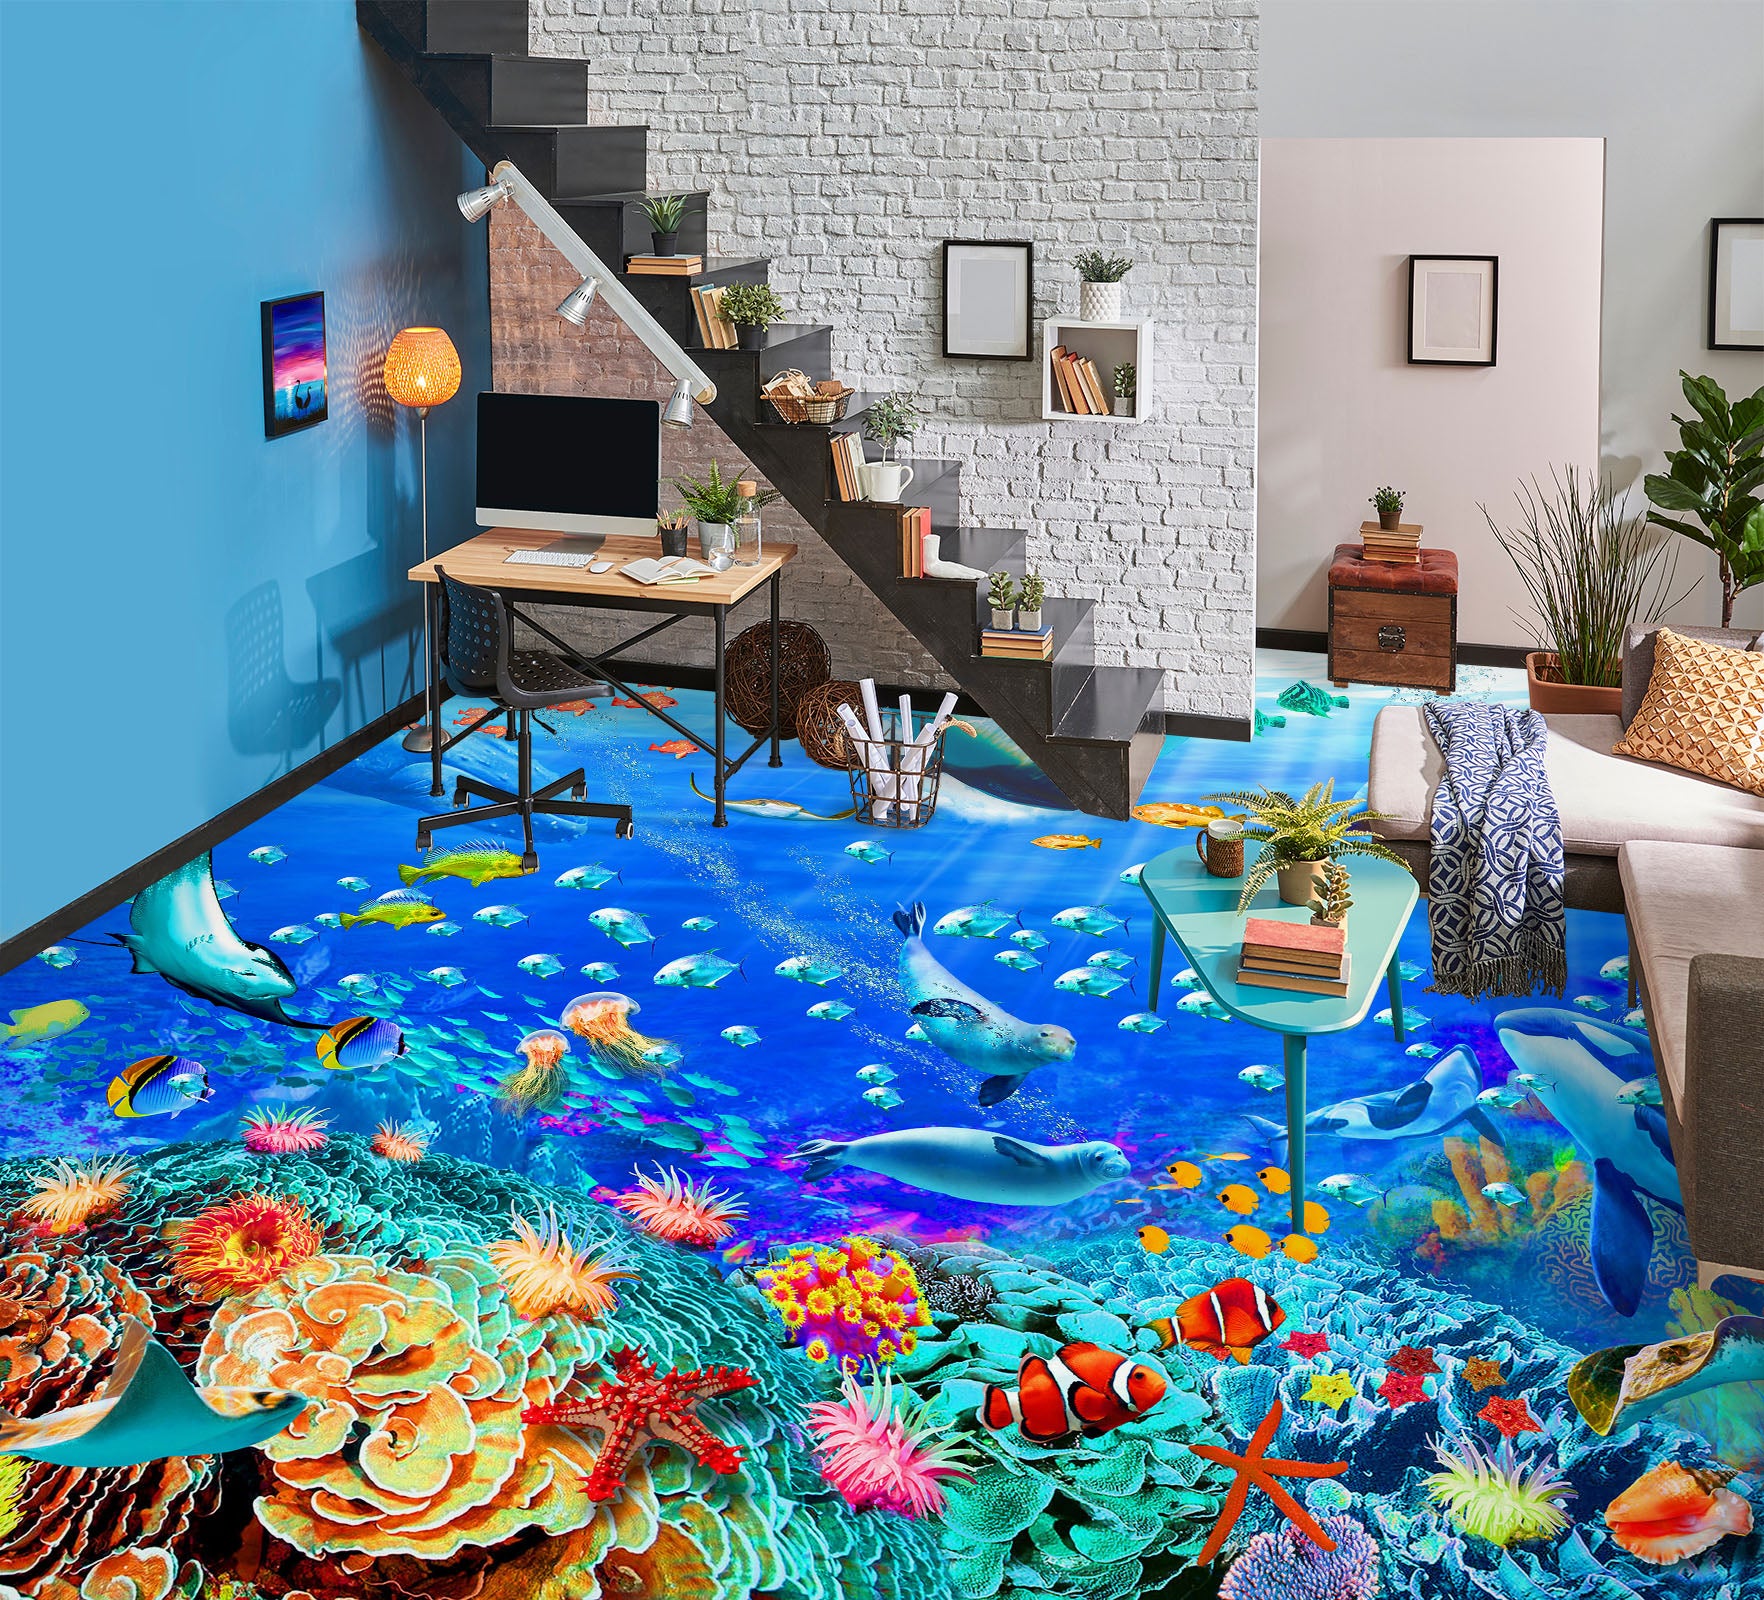 3D Seabed Fish 98164 Adrian Chesterman Floor Mural  Wallpaper Murals Self-Adhesive Removable Print Epoxy